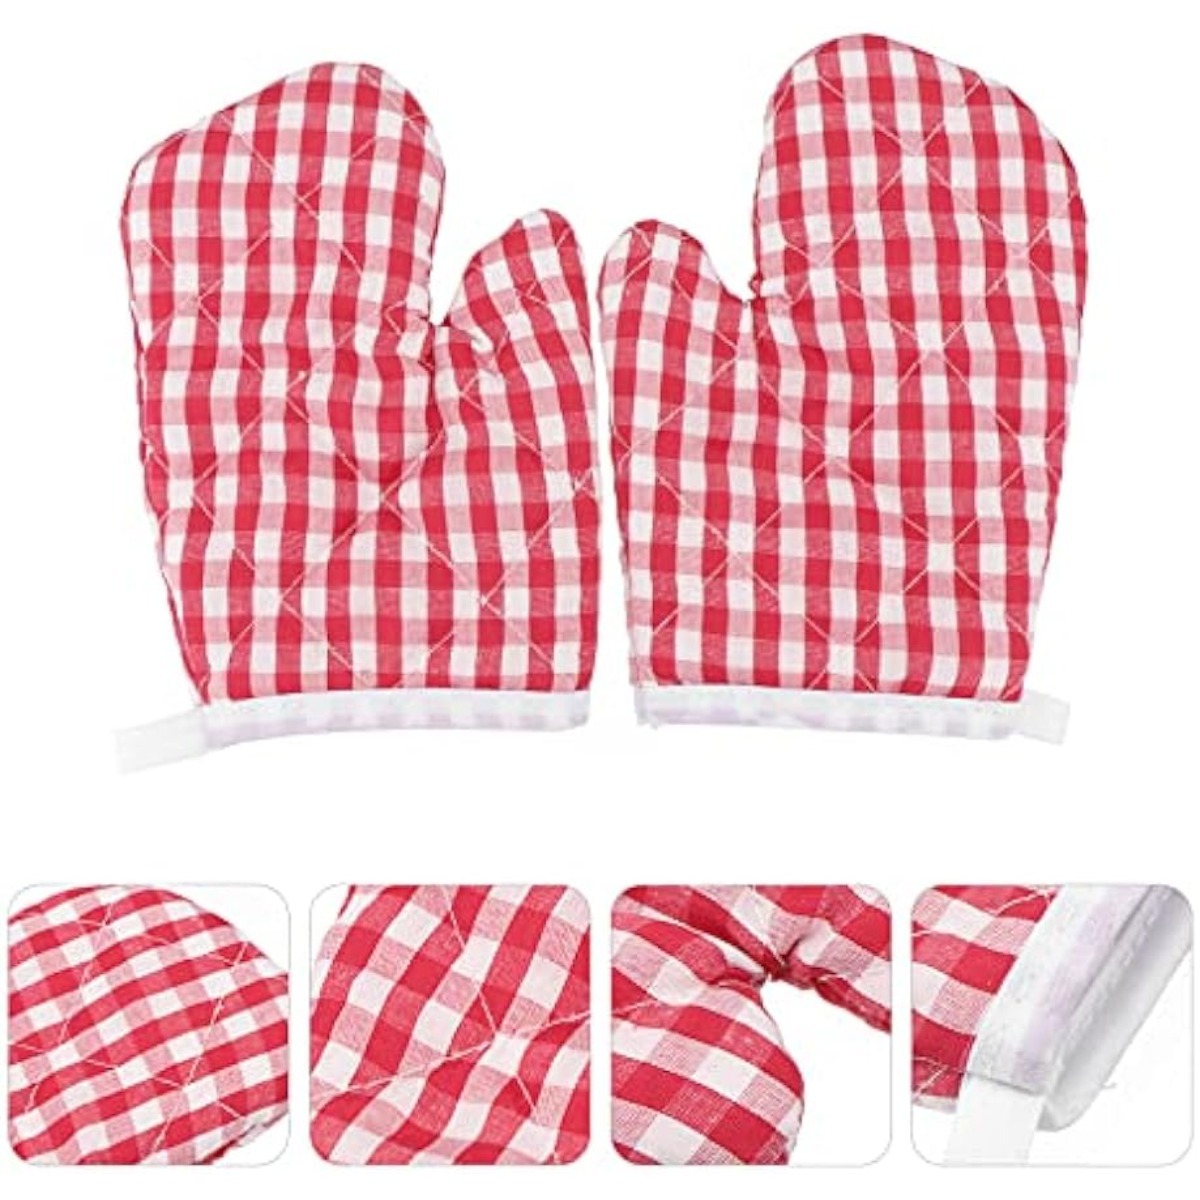  12 Pcs Kids Oven Mitts Children Heat Resistant Kitchen Mitts  Checkered Kitchen Oven Gloves Kids Kitchen Mittens for Safe Cooking Baking  Microwave Child Play BBQ Grilling, Age 2-10 (Red, Pink, Blue) 